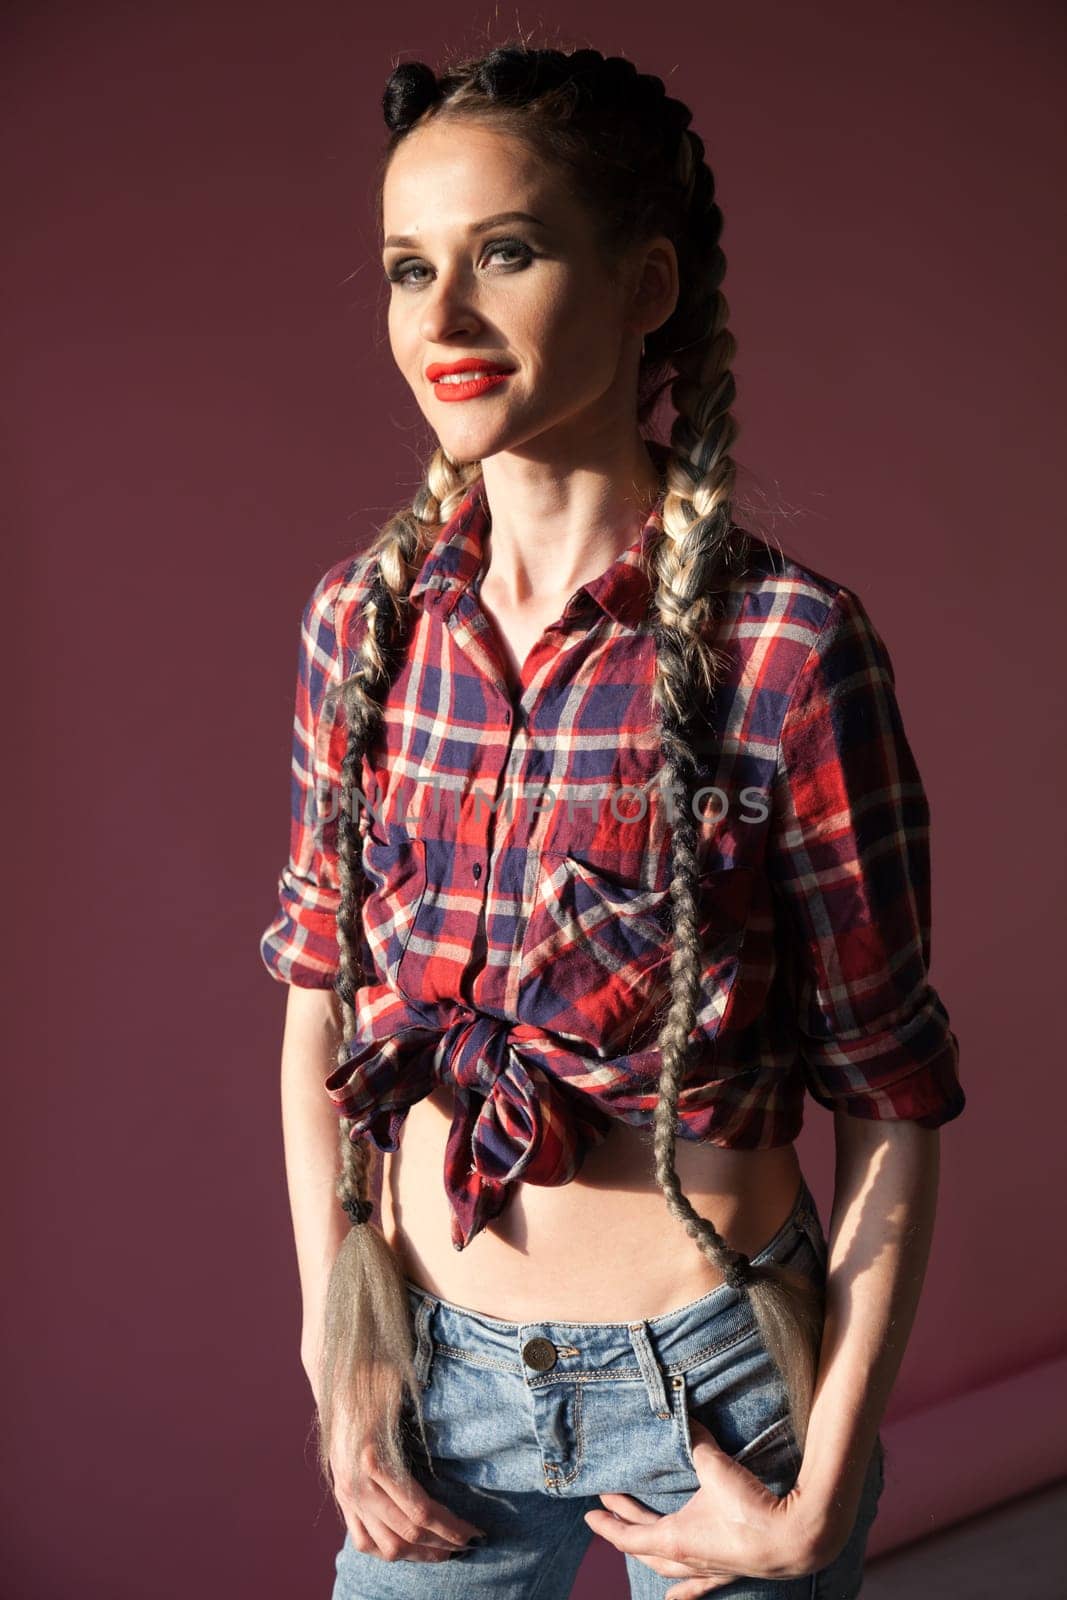 Portrait of a beautiful fashionable woman with braids in a shirt and jeans by Simakov